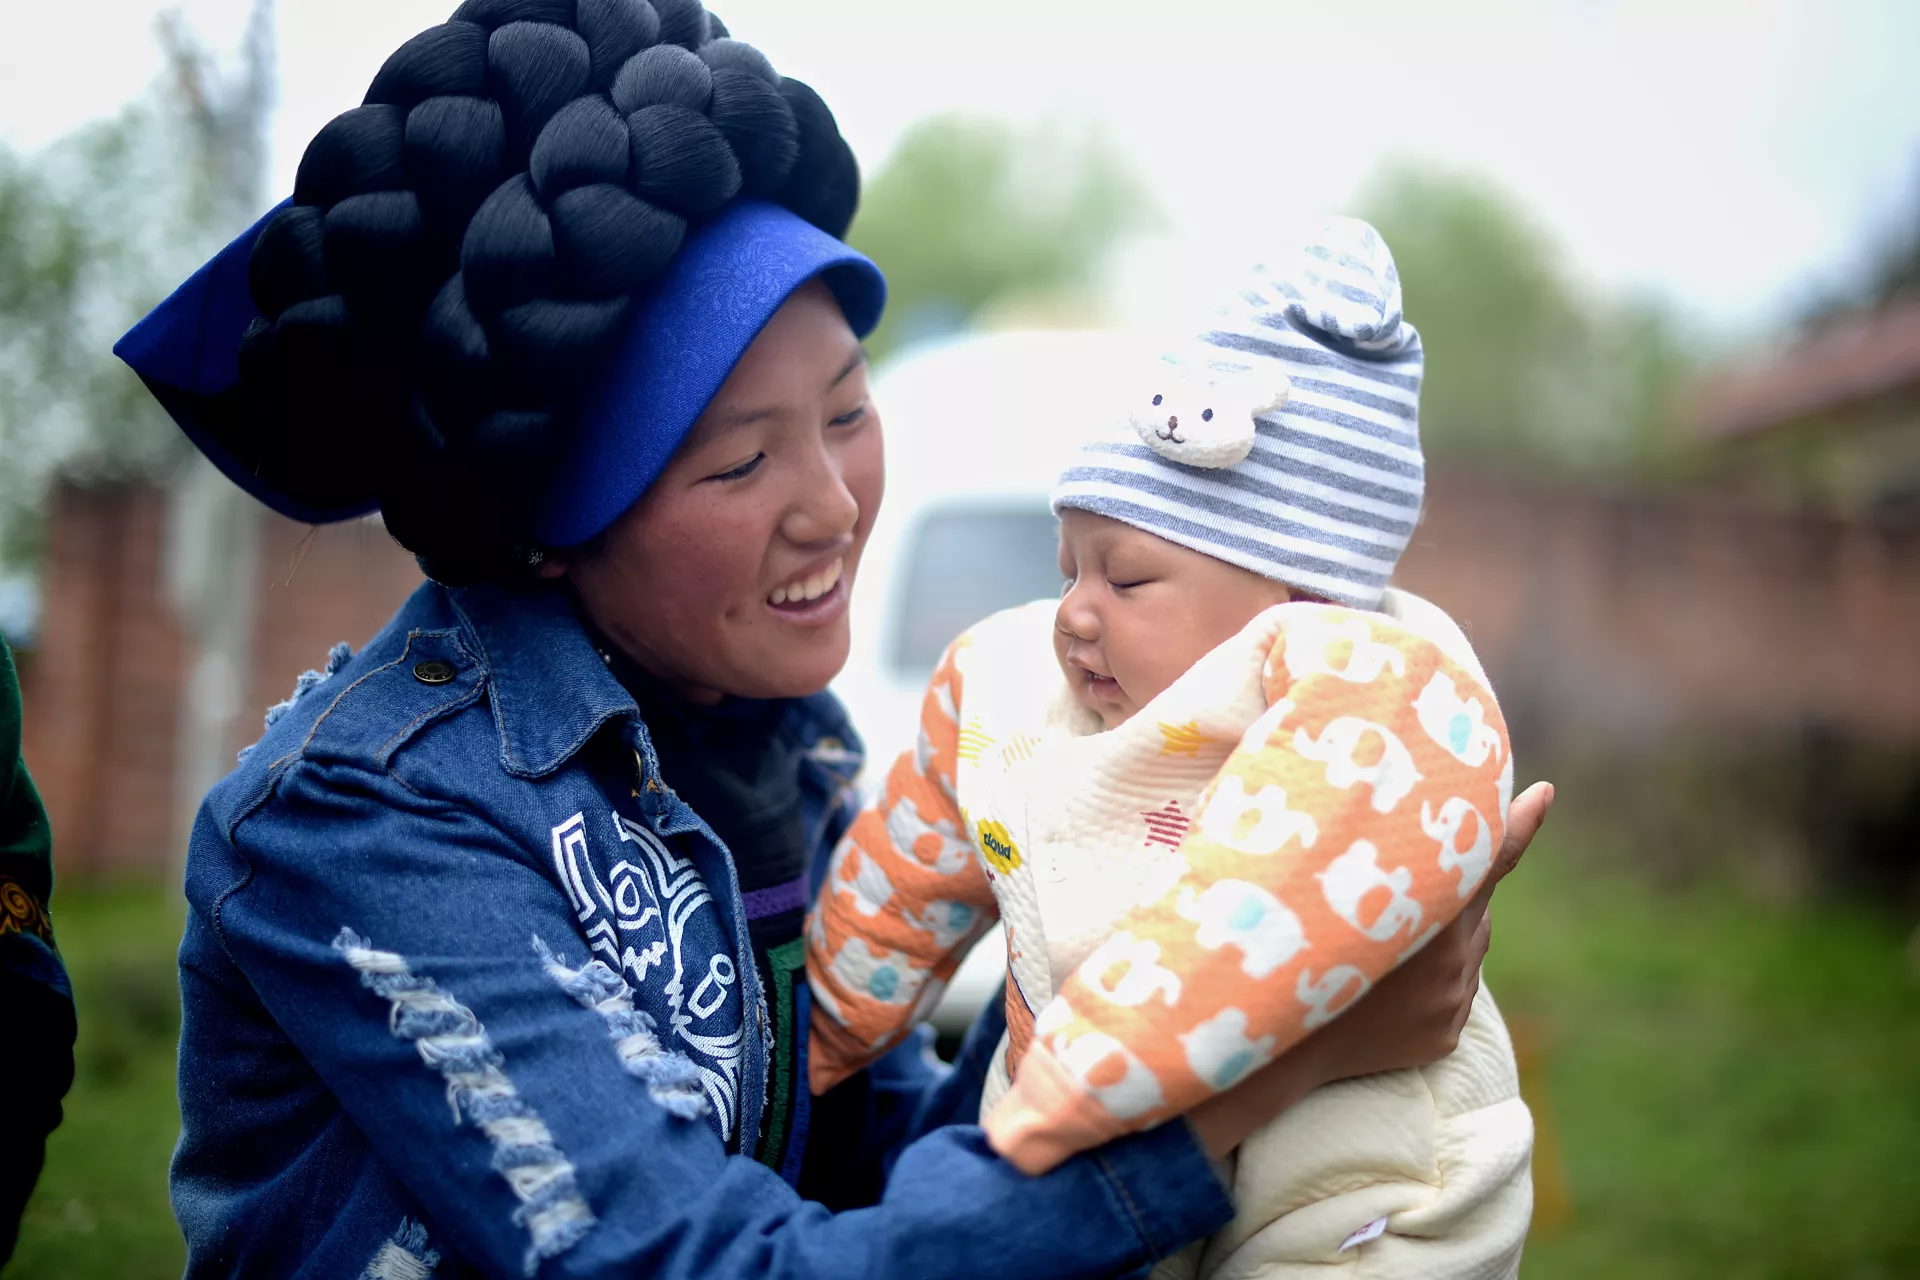 In China’s rural and ethnic minority areas, women often don’t deliver their babies in hospital due to tradition, distance or economic difficulties.